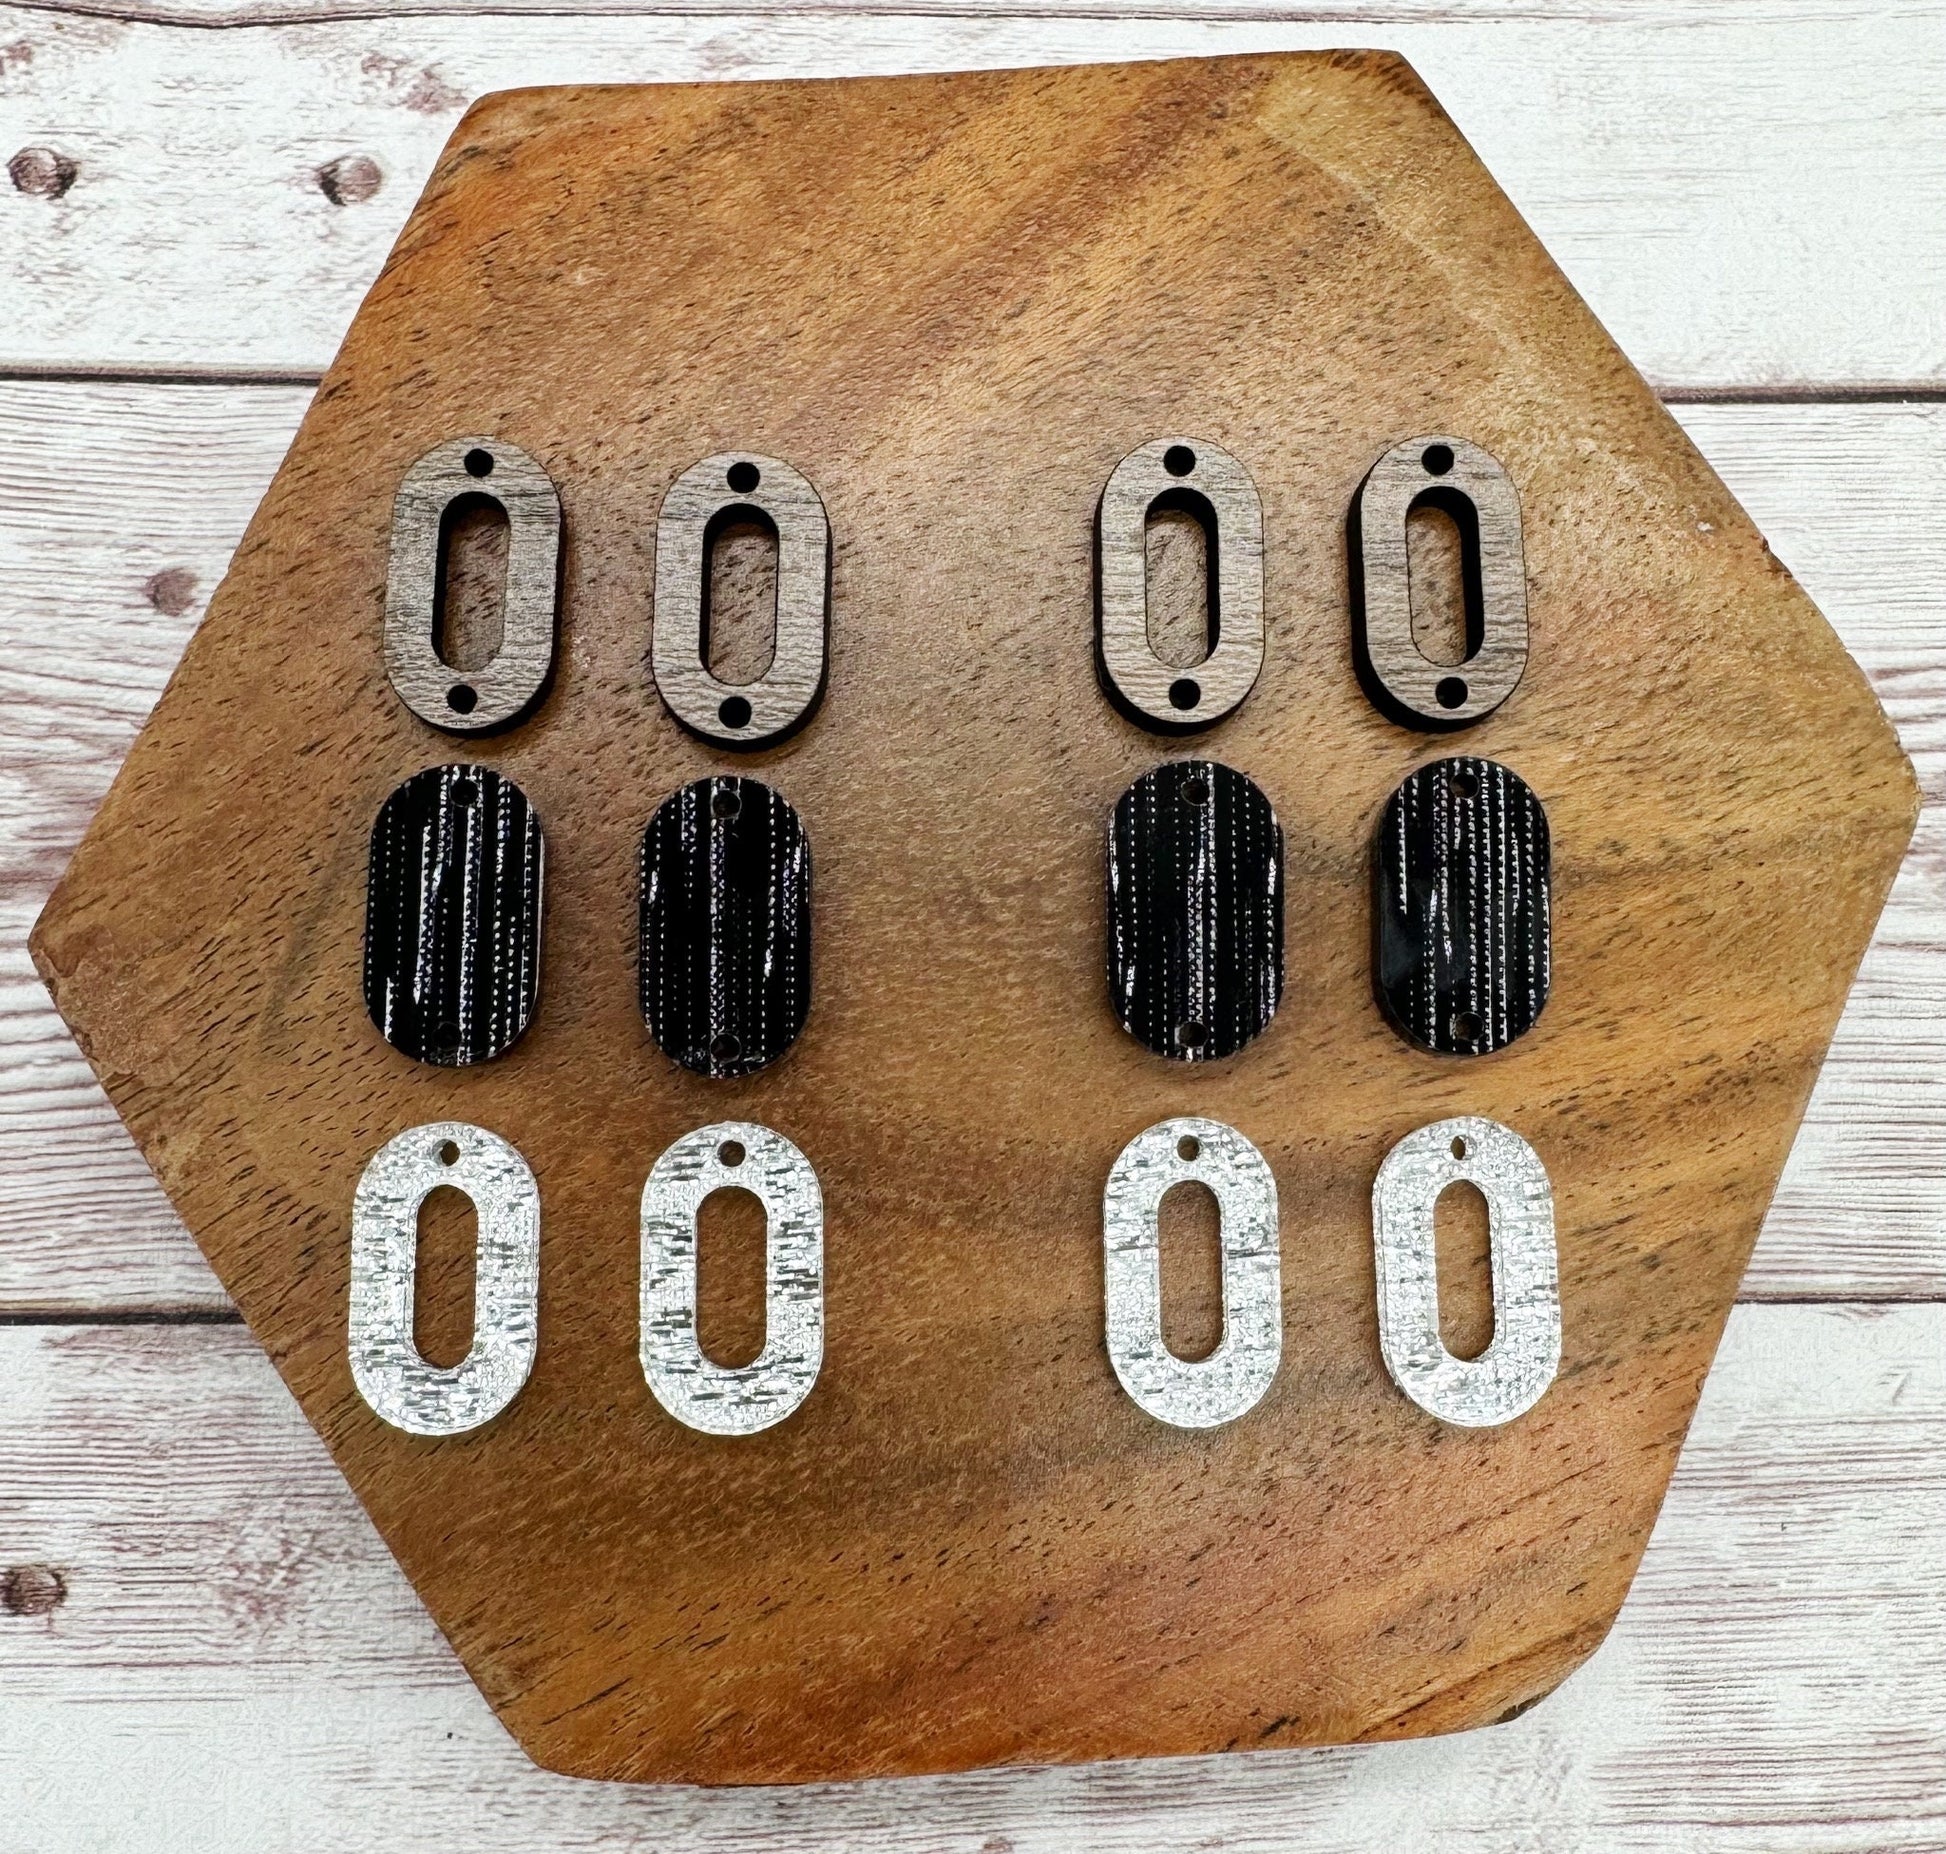 Black Linen Acrylic, Silver Linen Acrylic, and Wood Chain Trio Set Earring Blanks, DIY Jewelry Making